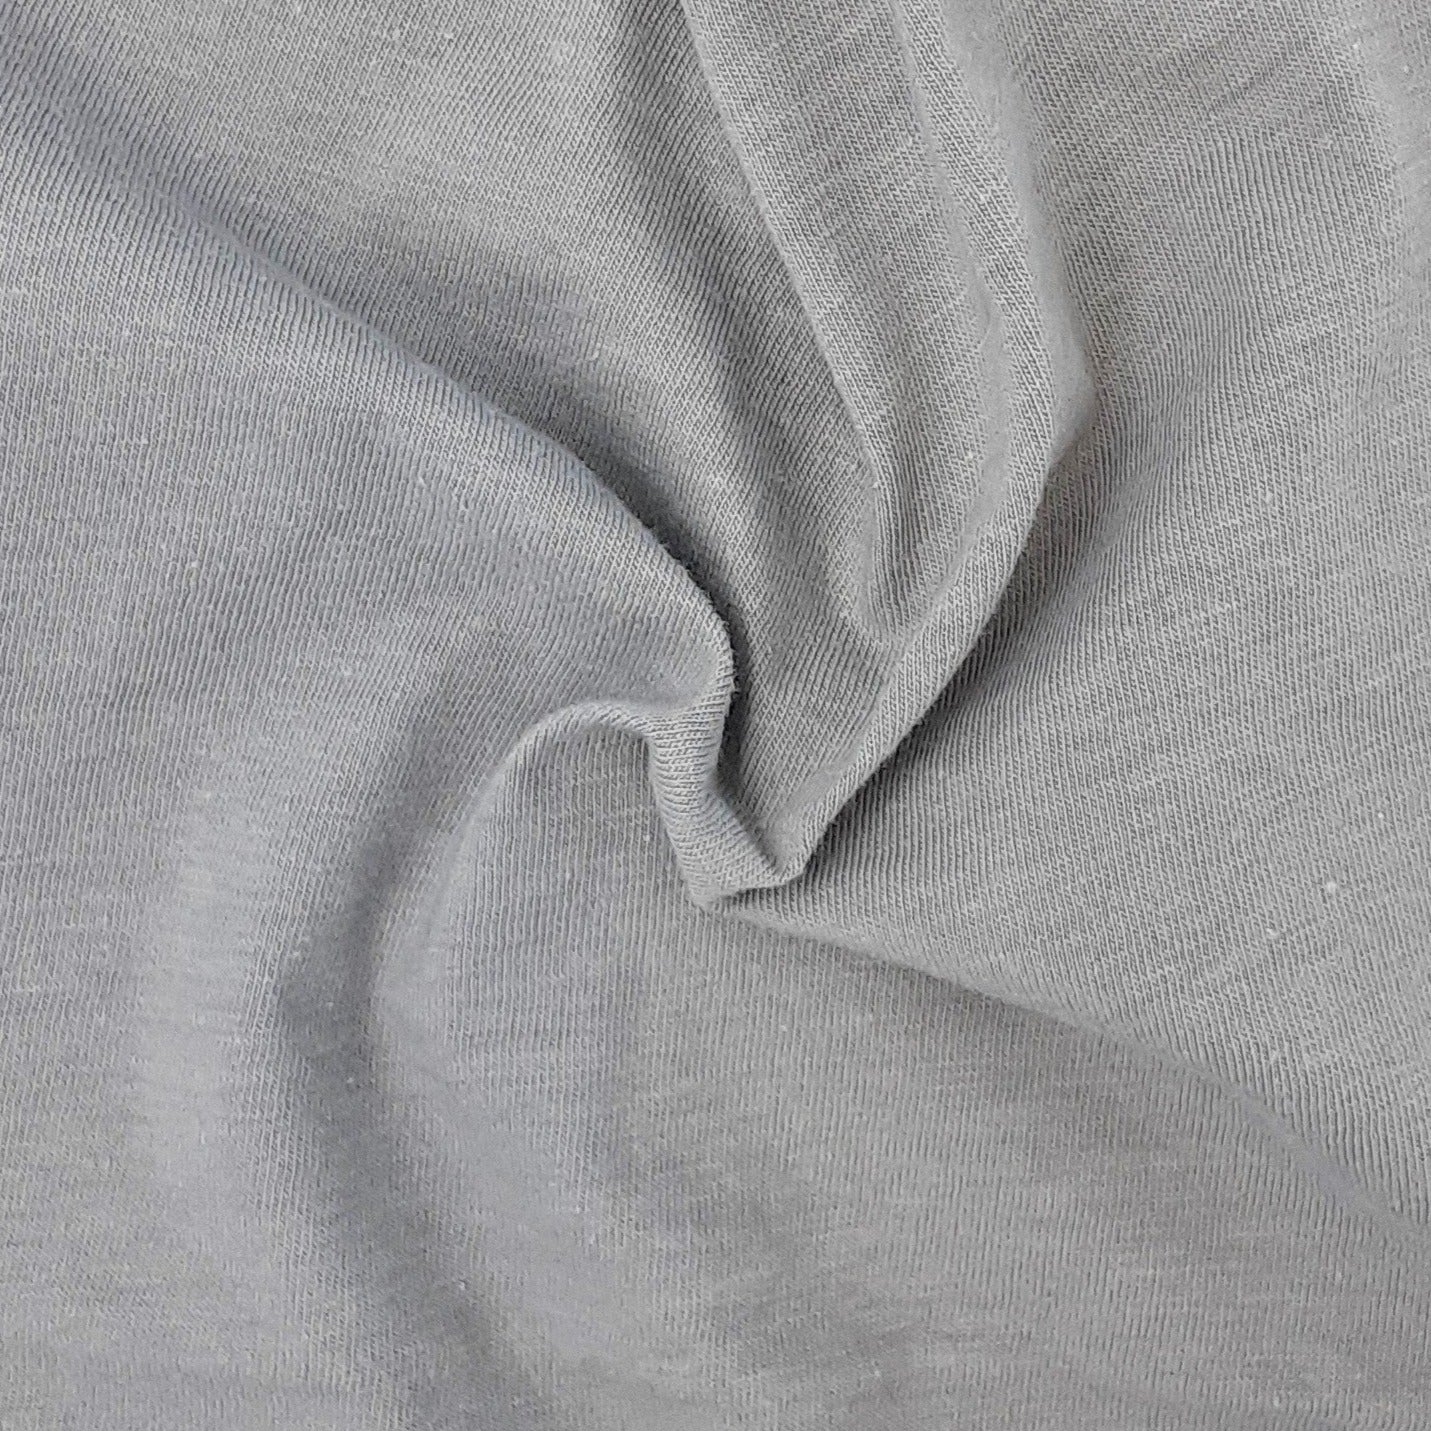 Grey #S217 Made In America 10 Ounce Jersey Knit Fabric - SKU 6870A